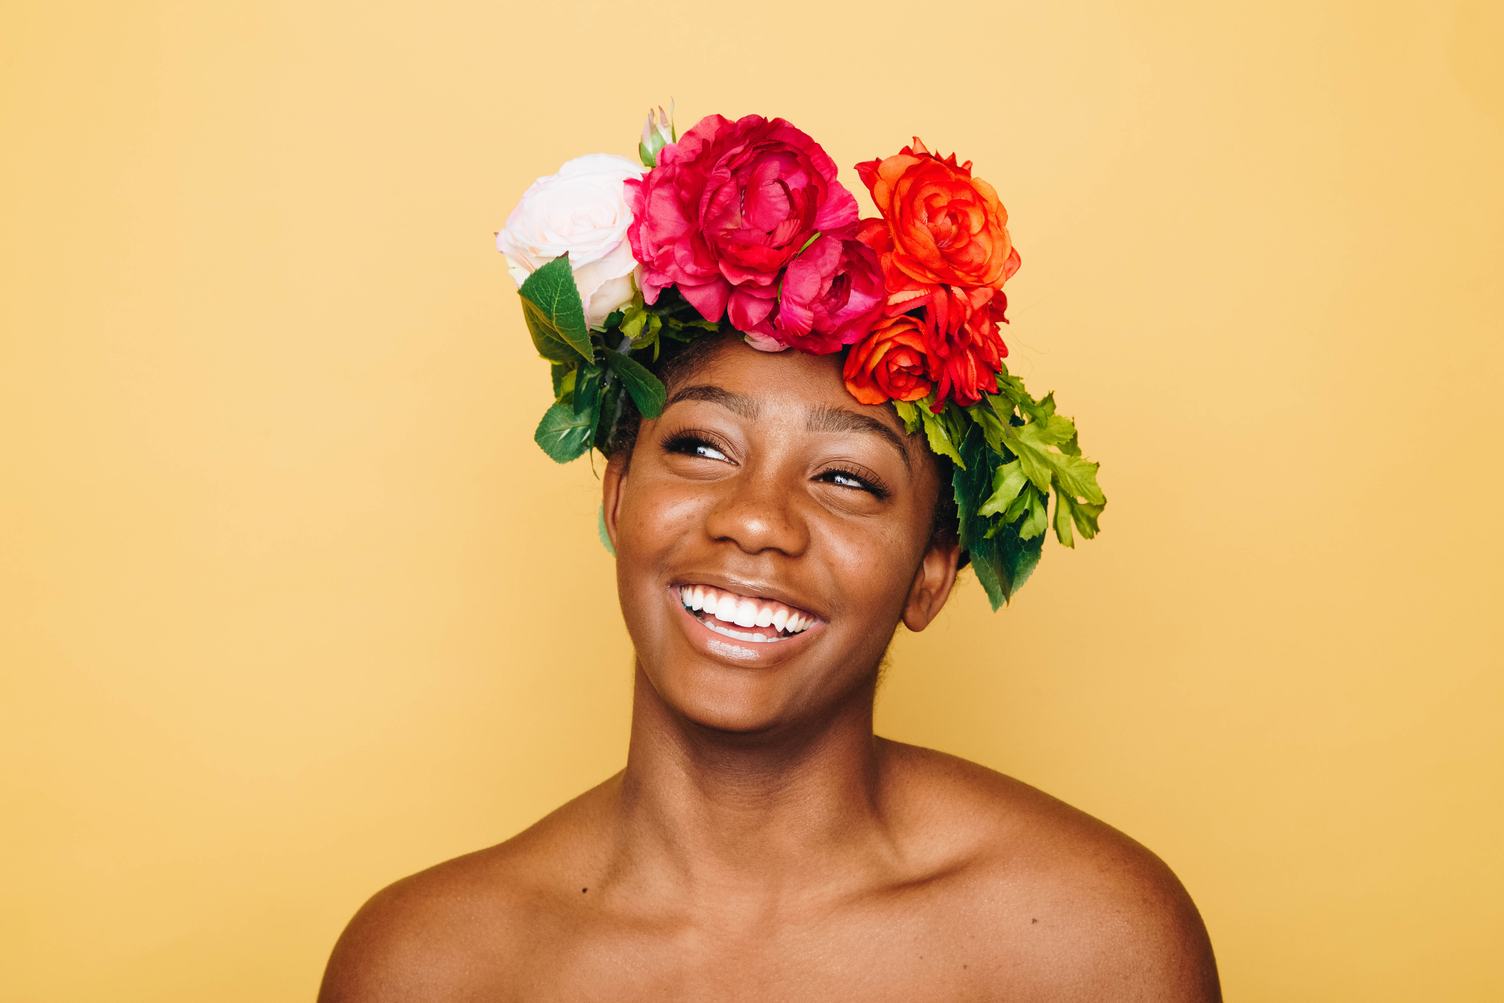 Smiling Woman with Flower Werth and Bare Shoulders